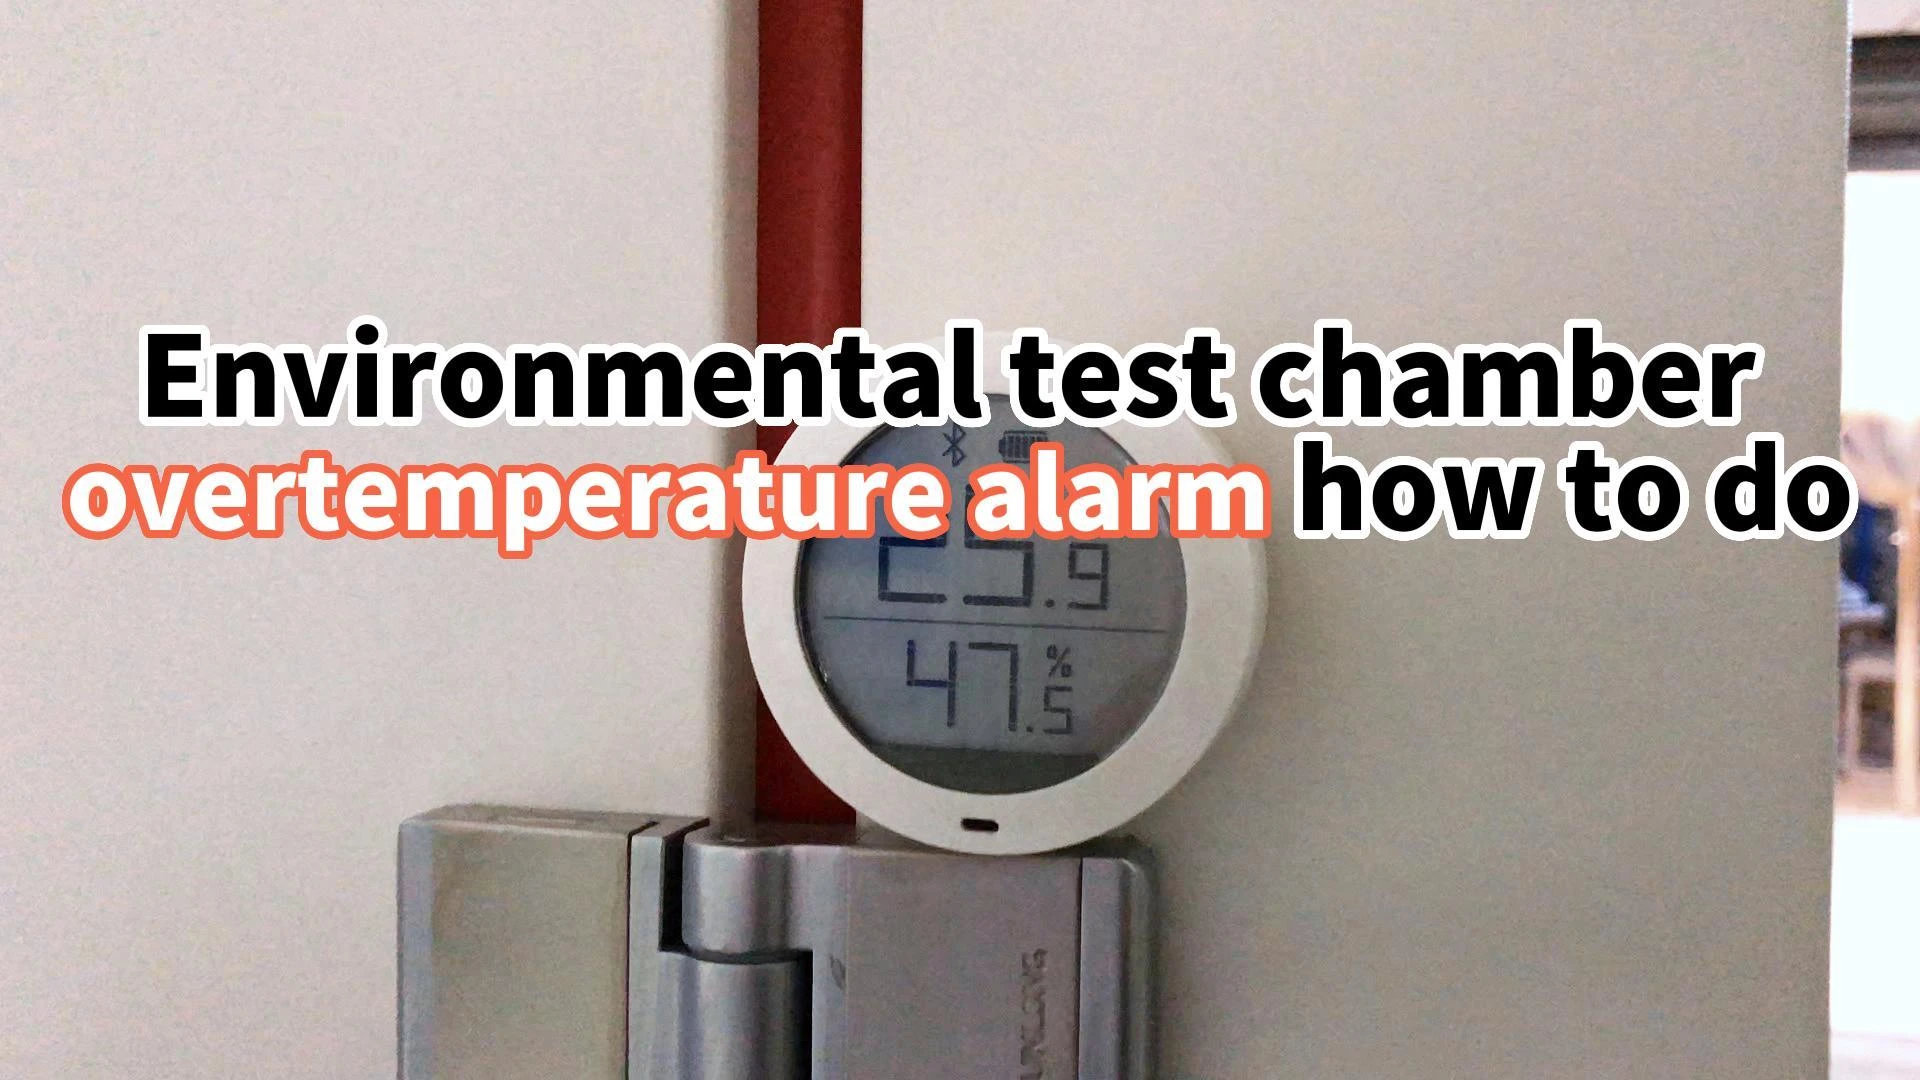 What should I do if there is an over-temperature alarm in the constant temperature and humidity test chamber